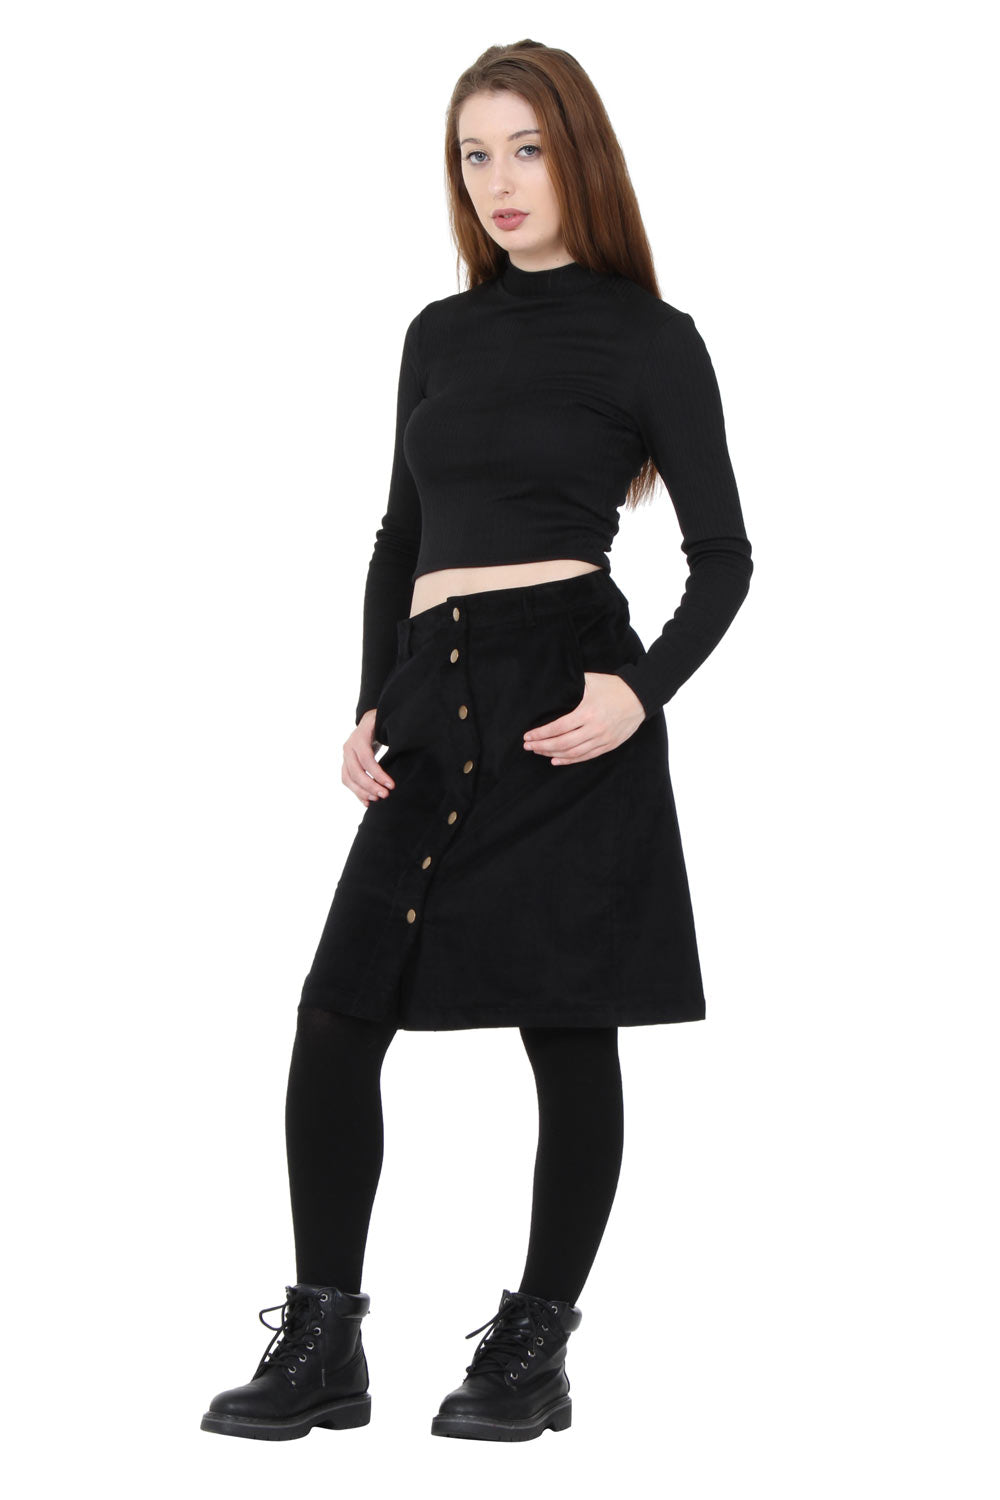 Full-length, slightly angled front view wearing Alice stretch black corduroy knee-length skirt with thumbs in front pockets.